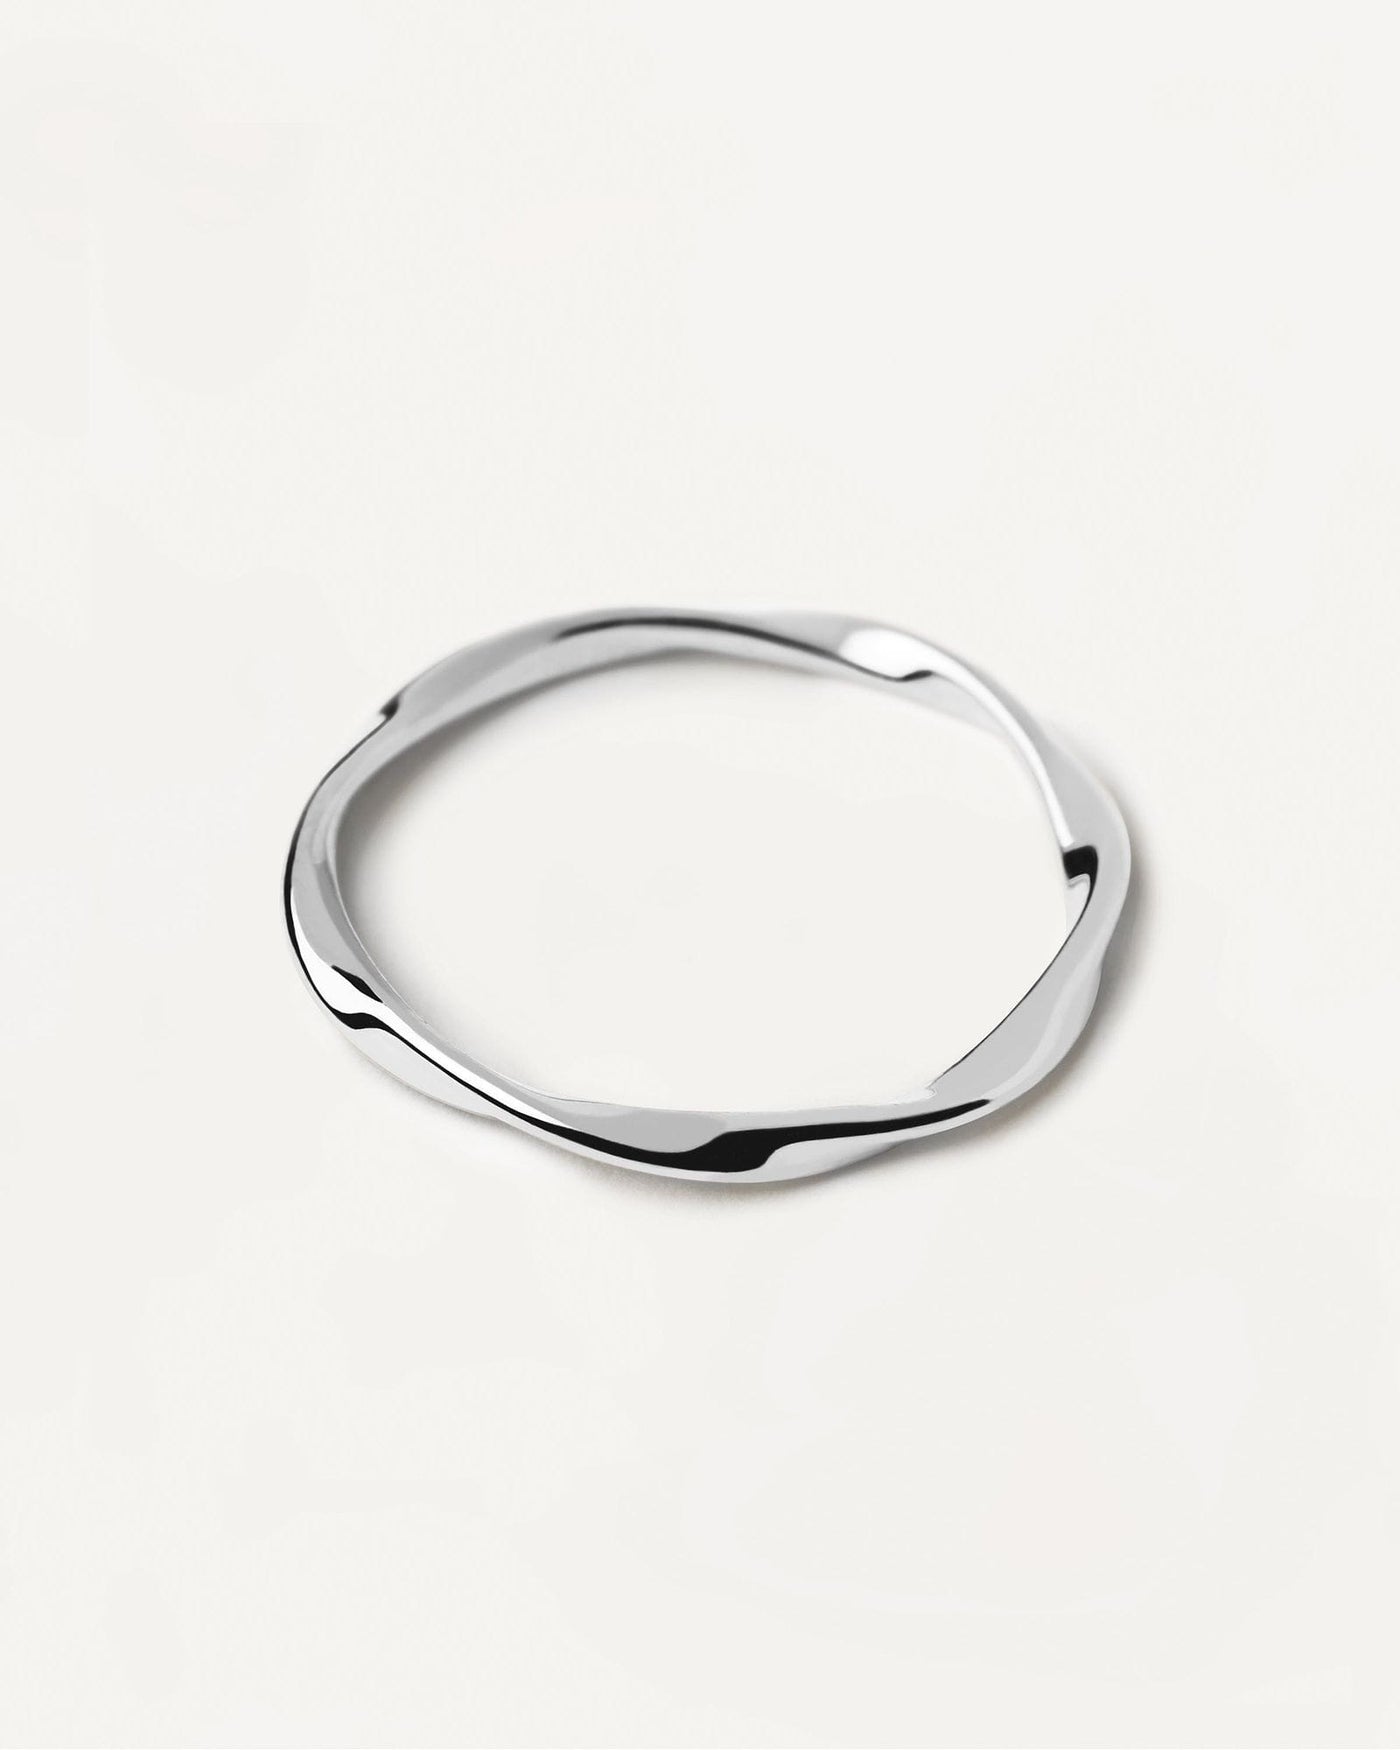 2024 Selection | Spiral Silver Ring. Twisted ring in sterling silver. Get the latest arrival from PDPAOLA. Place your order safely and get this Best Seller. Free Shipping.